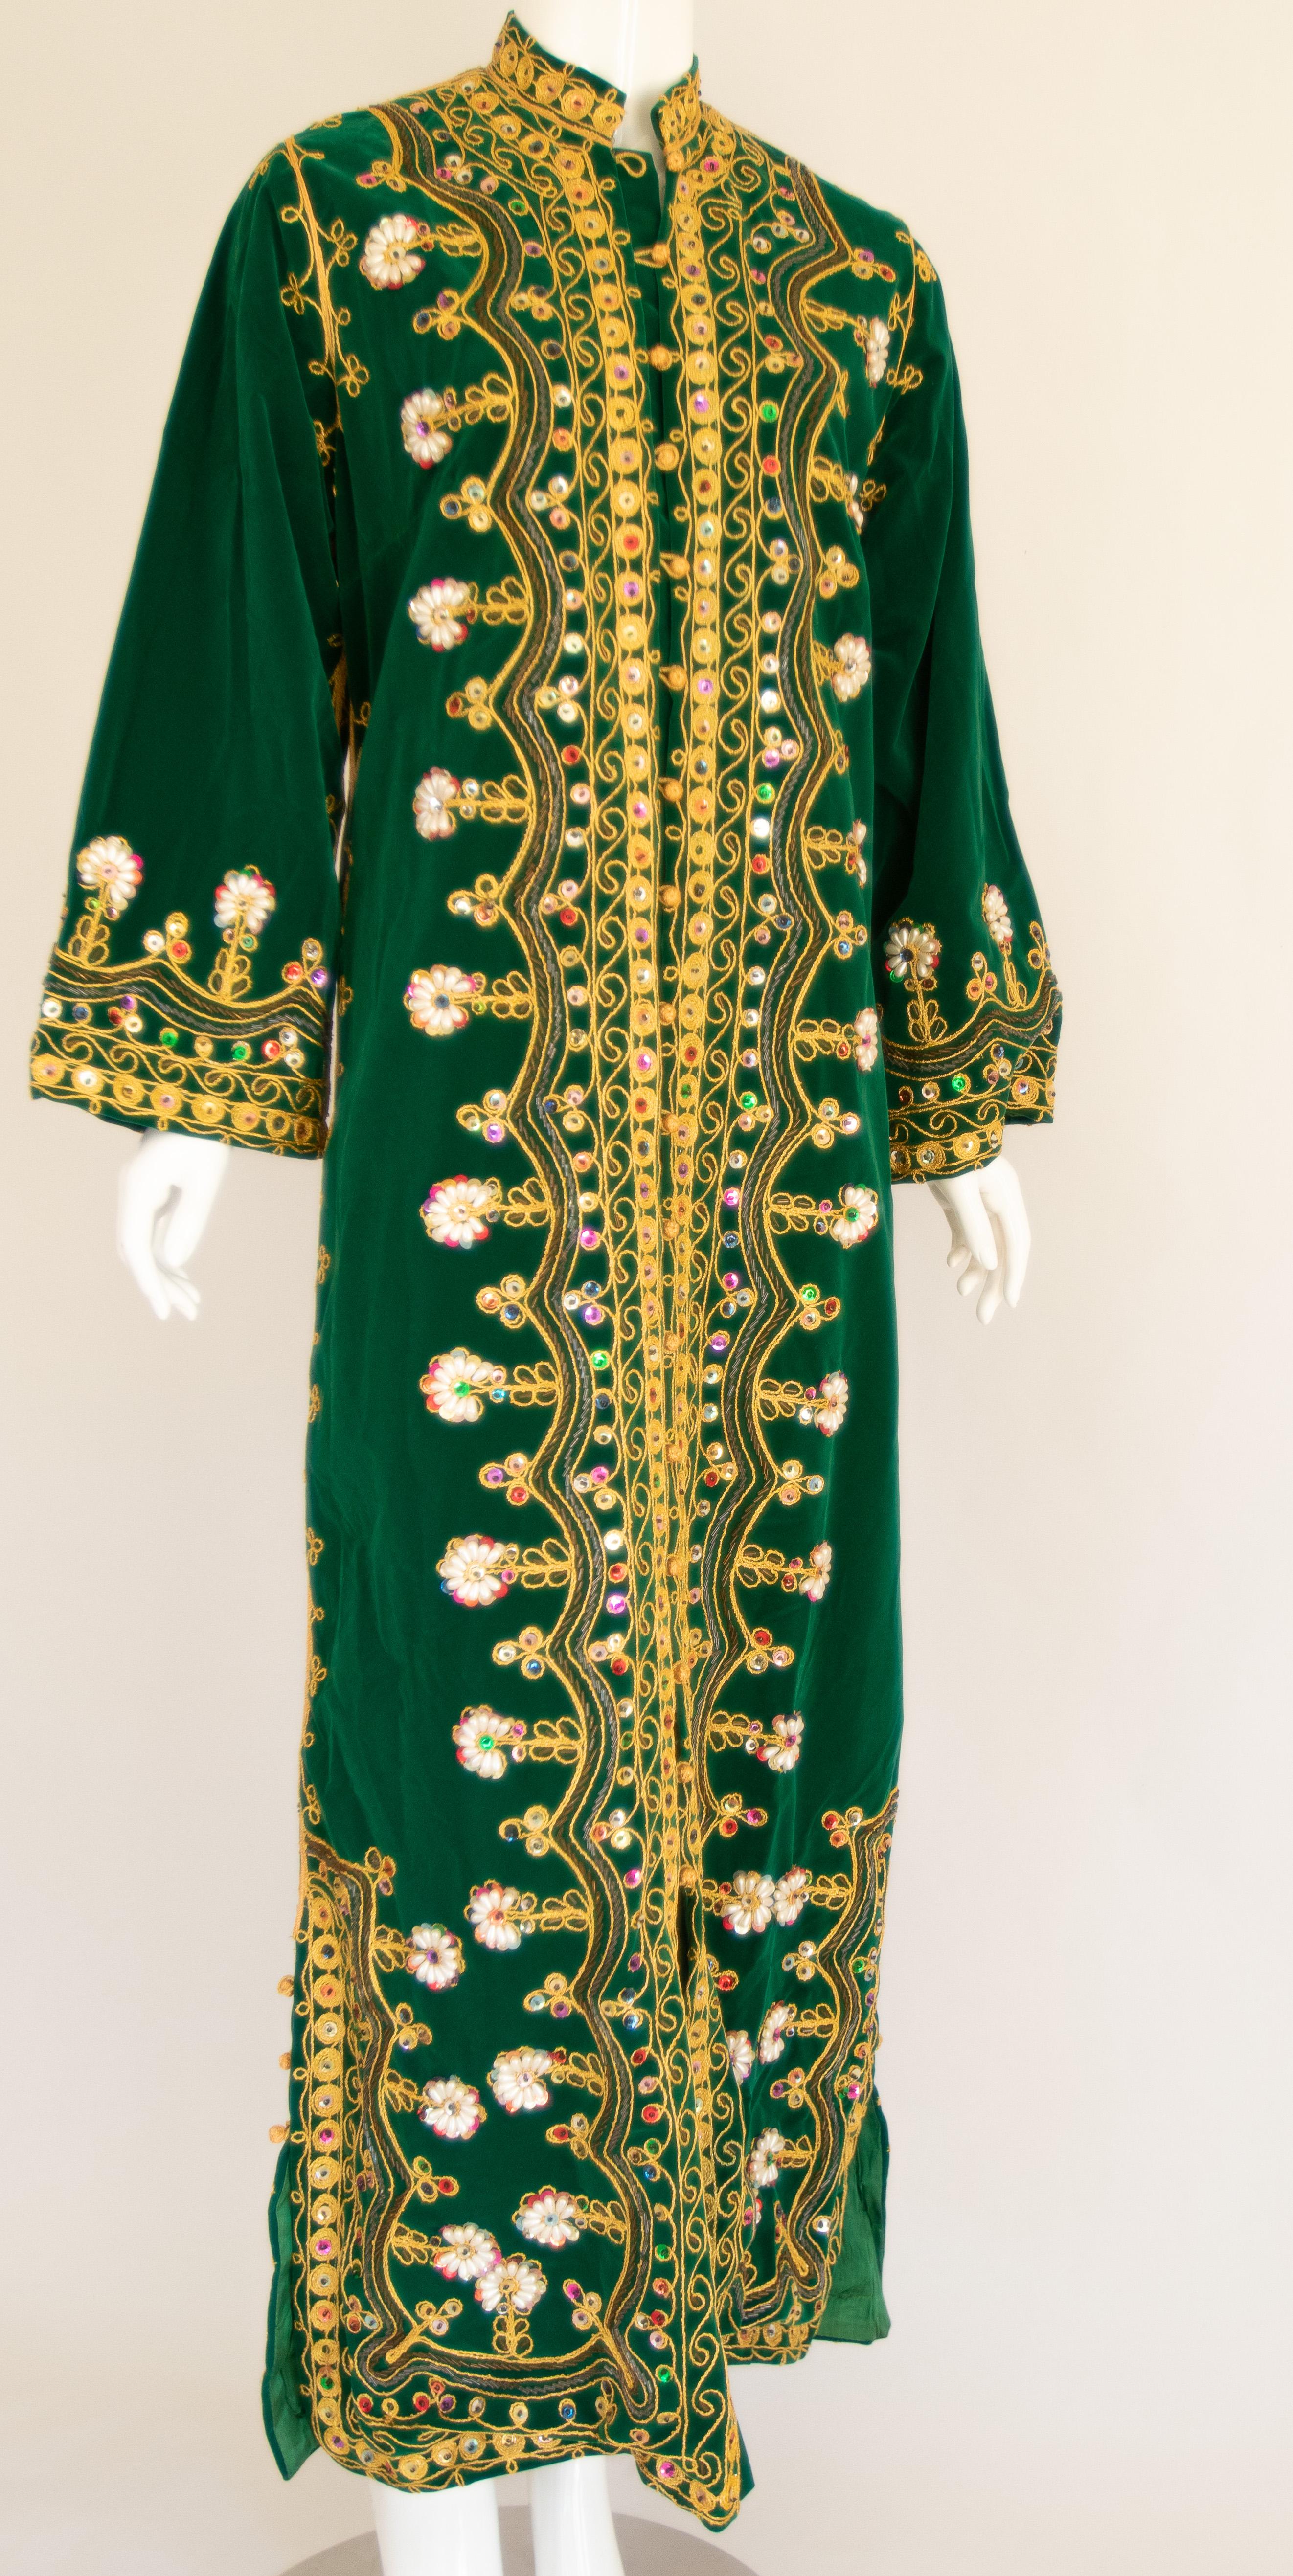 Amazing vintage Moroccan Caftan, green silk velvet with embroidered gold threads trim, Circa 1960's
The dark green velvet kaftan has been hand-sewn and intricately embroidered with gold threads rim and was entirely embellished by hand adding beads